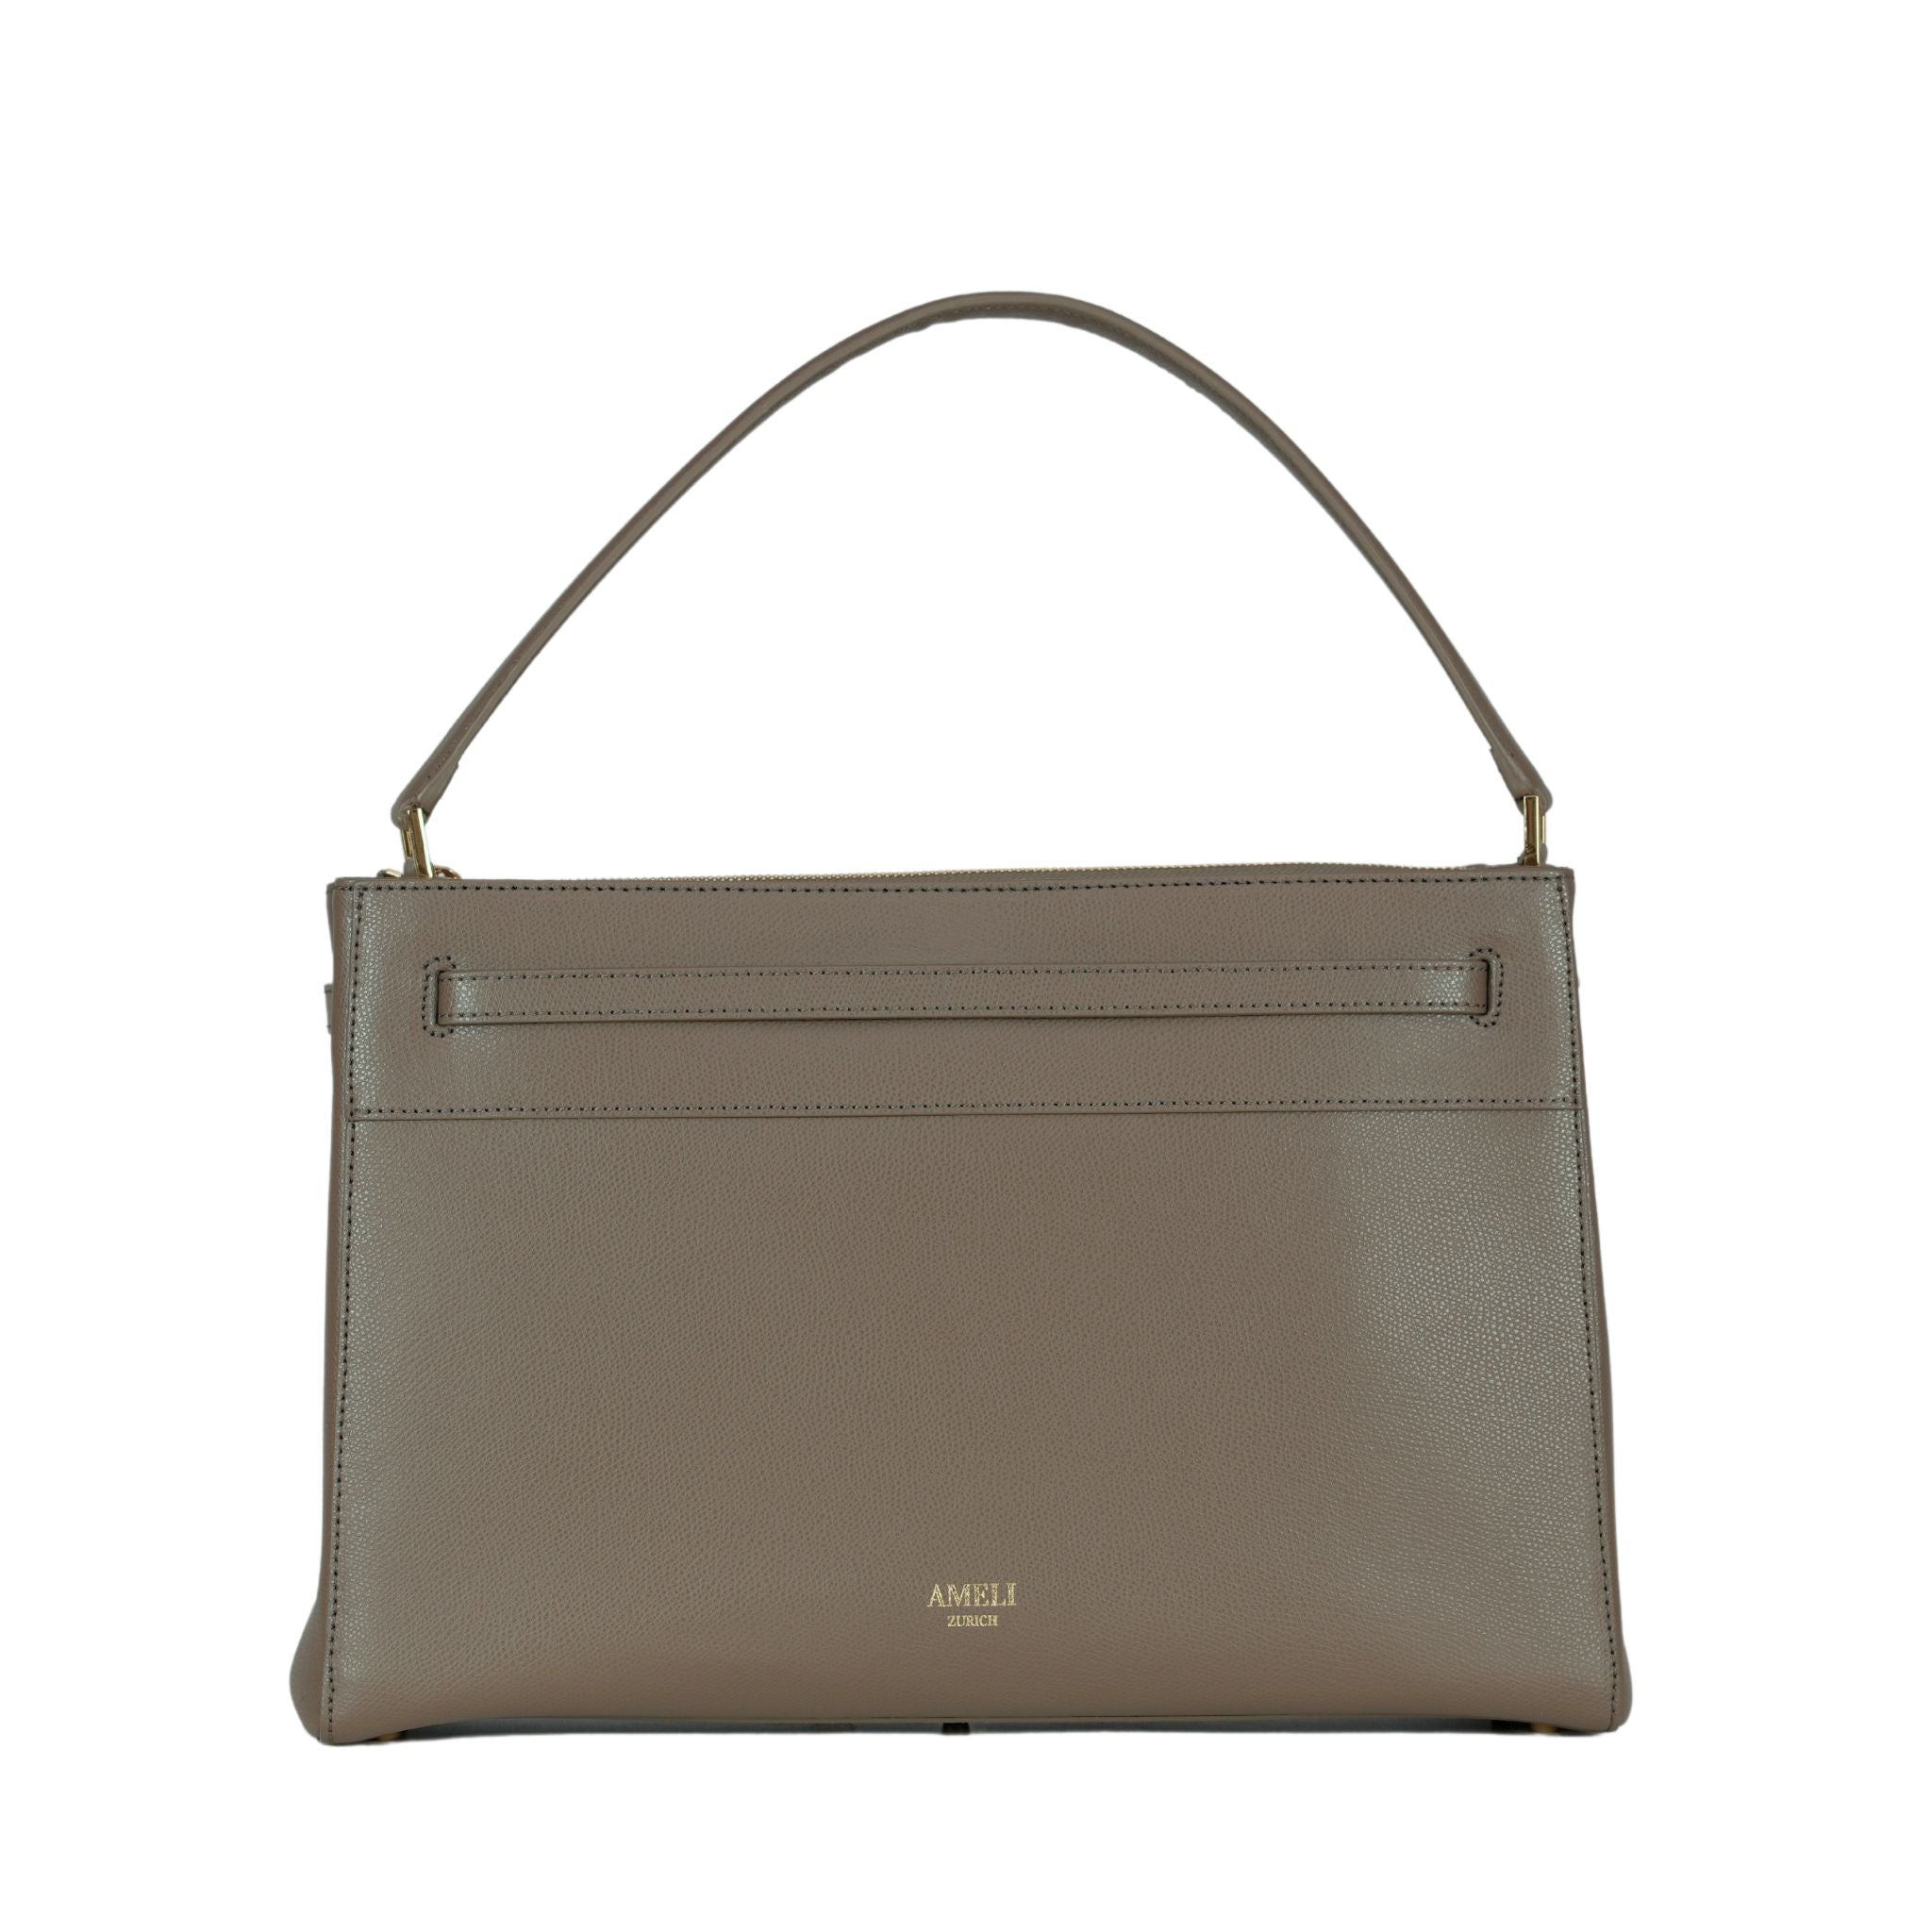 AMELI Zurich | SEEFELD | Greige | Pebbled Leather | Front